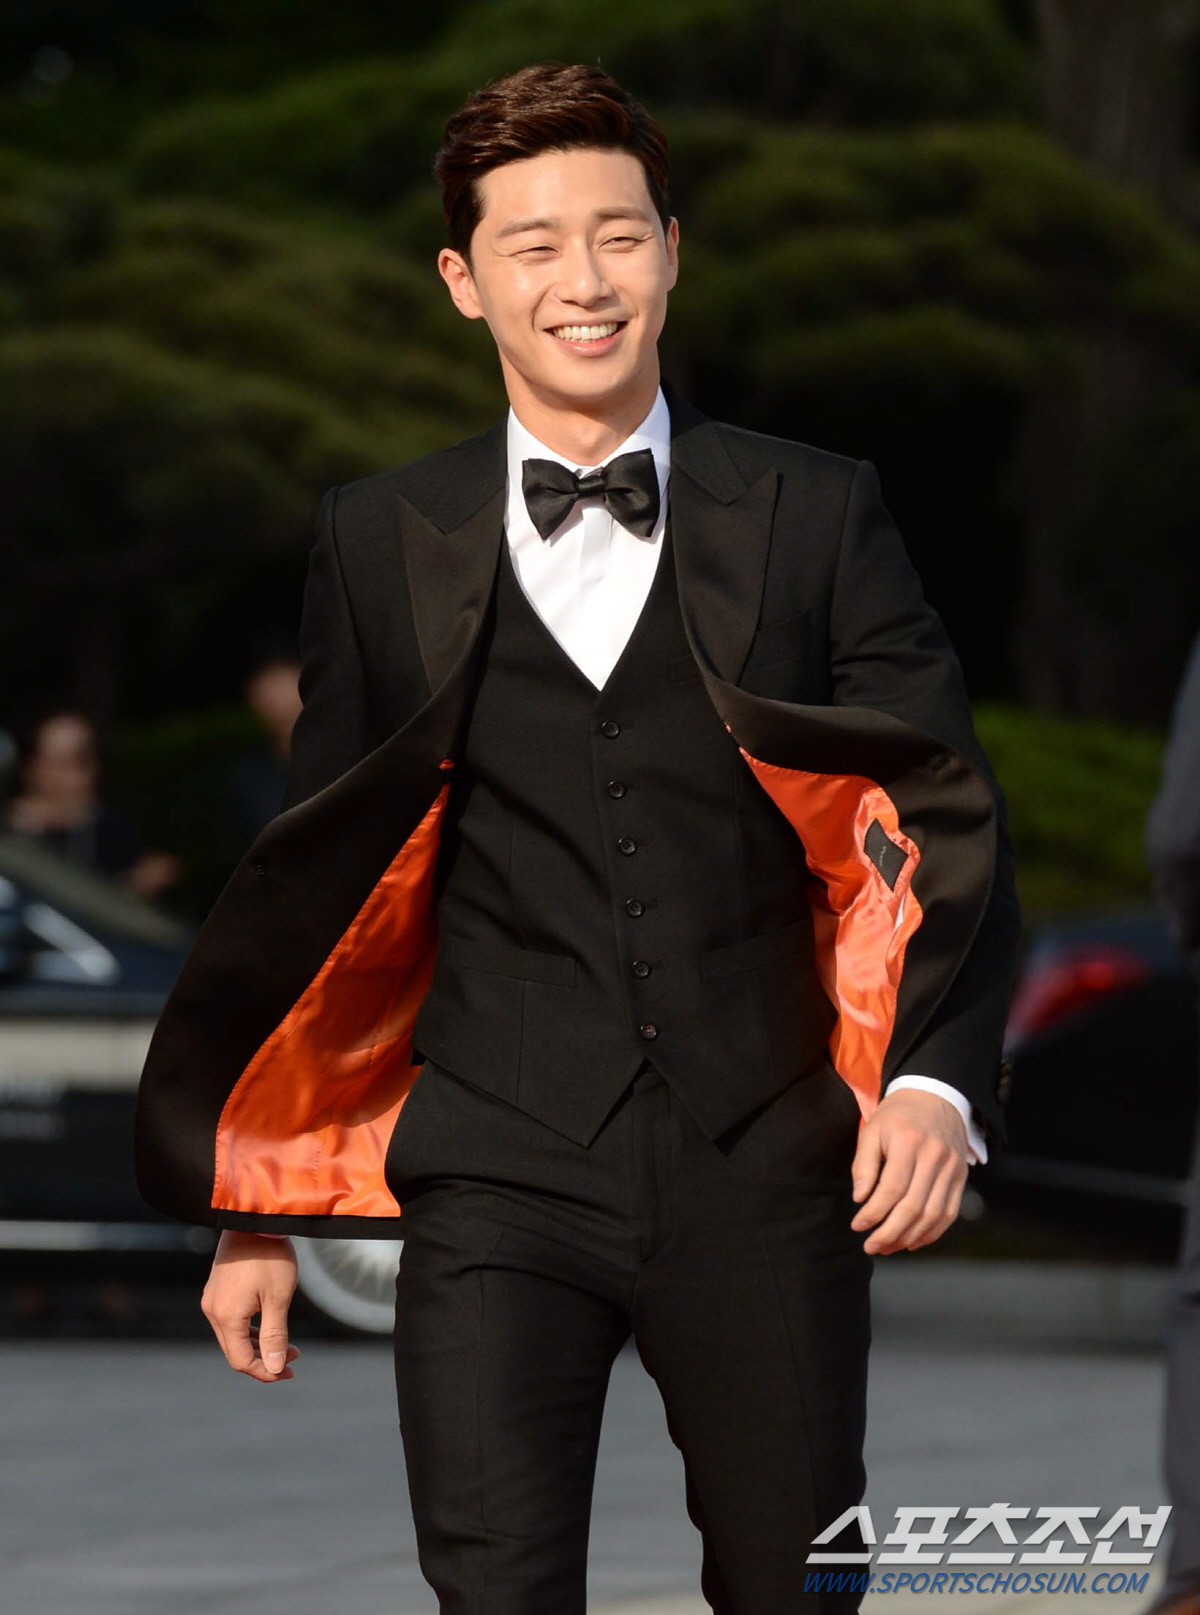 In Golden Up, Park Seo-joon played the role of Park Hyun-tae, the youngest son of a cute child who has become accustomed to deviations because of his wounds.He has not been able to clean up his relationship with the long-time couple, so he has Acted a playboy who makes his wife, Chung Mong-hyun (Baek Jin-hee), who is married.Park Seo-joon, a used rookie in his third year of debut, received a love of A house theater female fans by expressing stable inner acting and sad feelings about his loved ones in Warm Words.In She Was Pretty, Park Seo-joon was transformed from fat to perfect man, and he caught his attention with Hye-jin (Hwang Jeong-eum) and a gentle love that crashed from Icon of his first love to Park Seo-joon in Ssam, My Way captured the womans heart by Acting the Godongman Character, which transformed from a former Taekwondo player to a martial arts player.In Why is Kim Secretary?, Lee Young-joon, a tough but sweet man, expressed the same couple chemistry as it is enough to inspire Park Min-young and his enthusiasm.